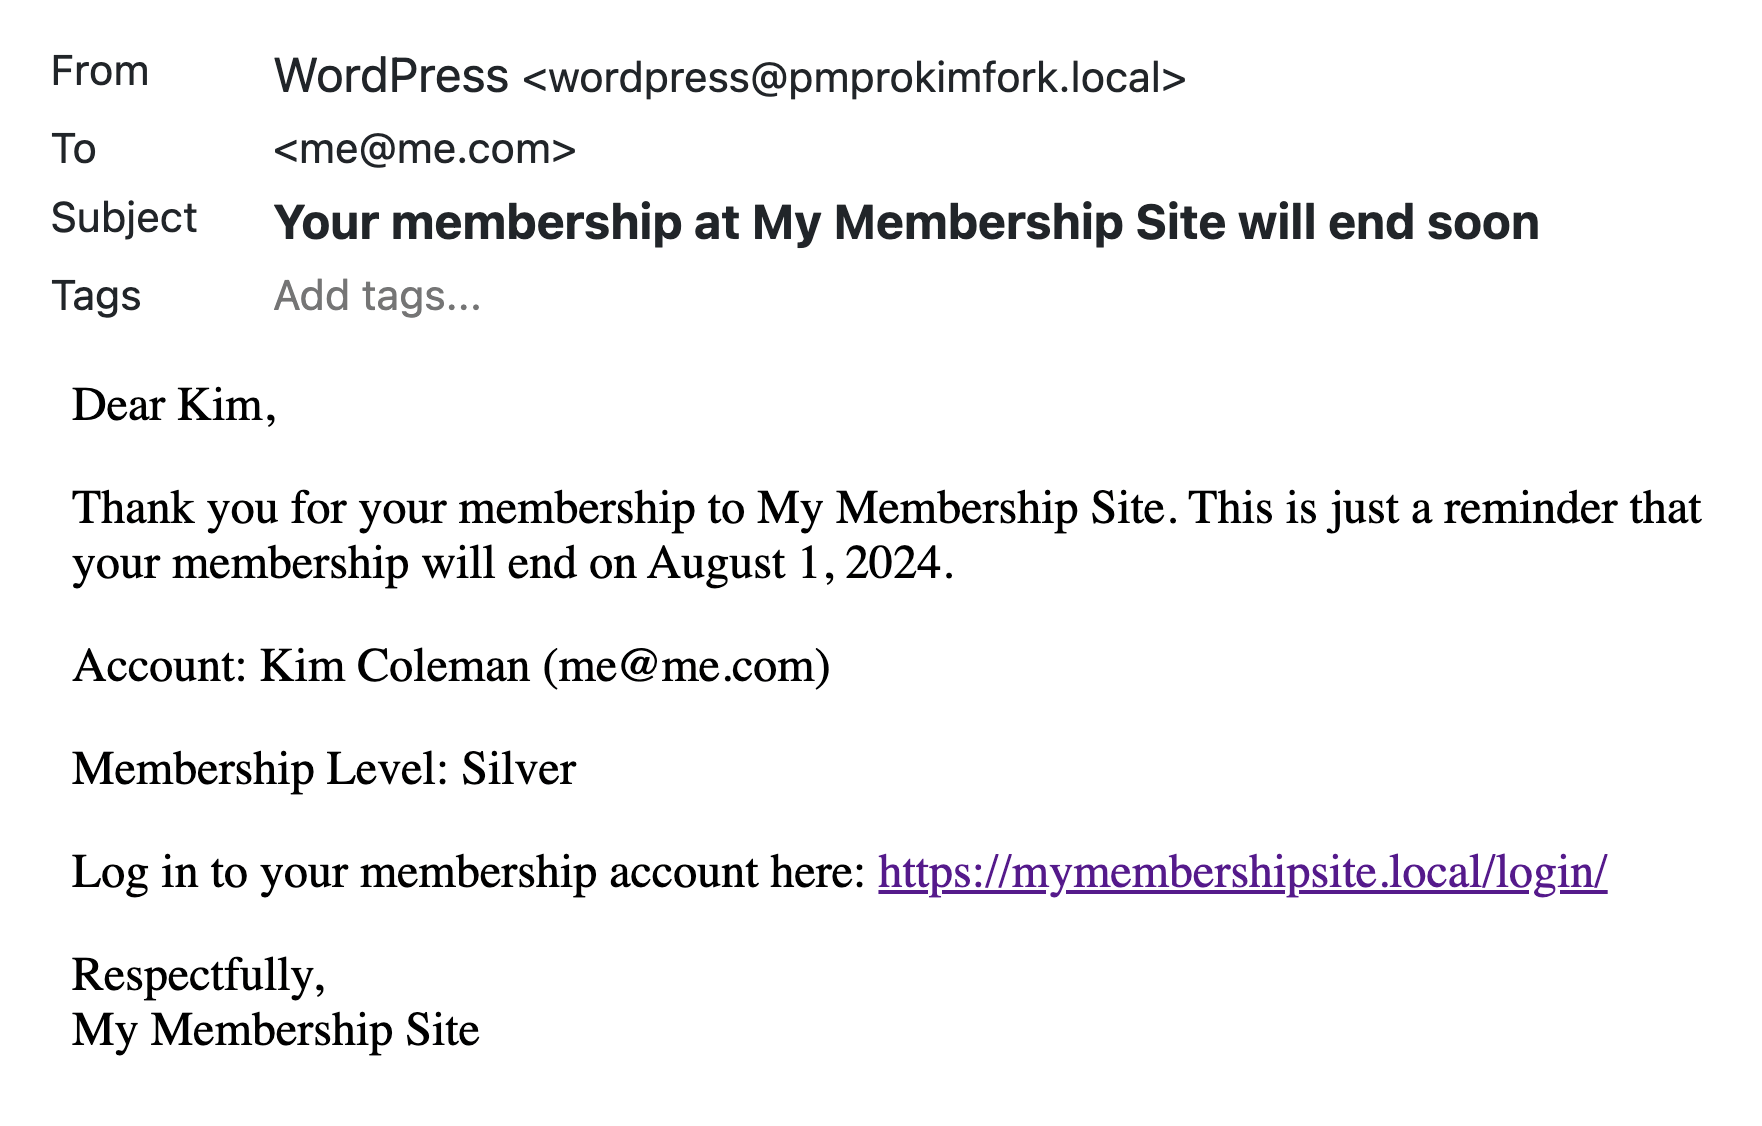 Screenshot of an example expiration warning email sent by Paid Memberships Pro